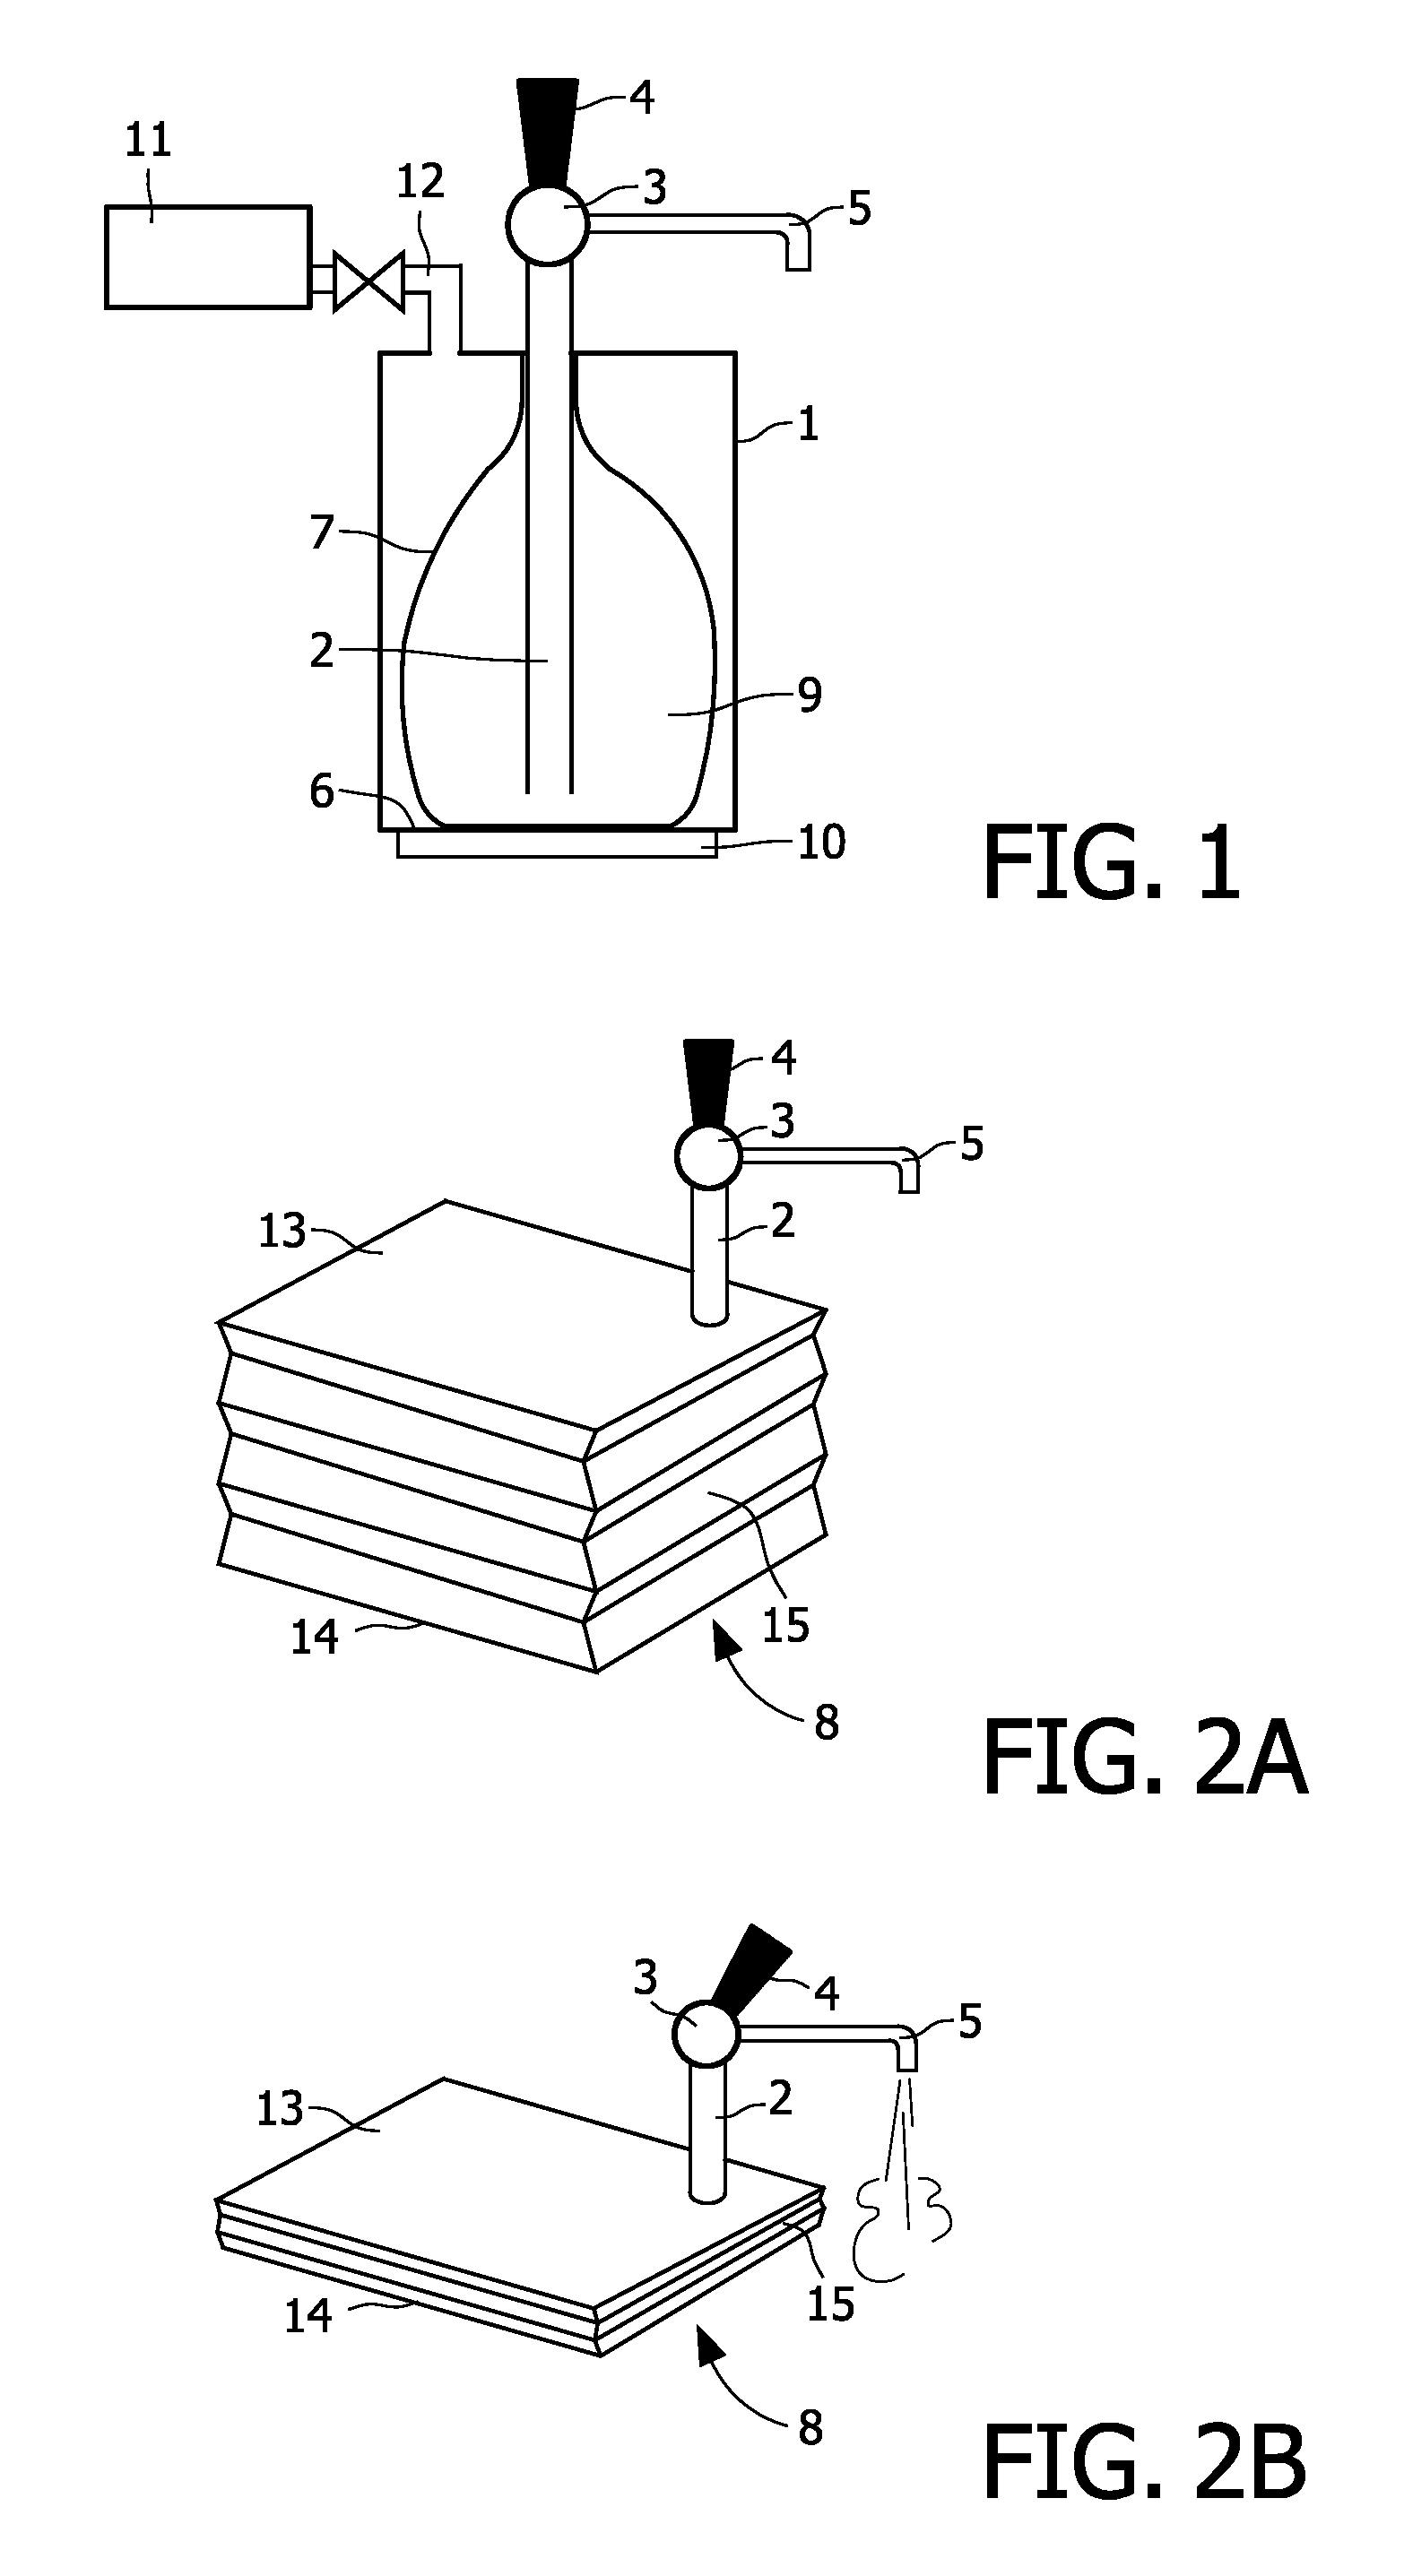 Keg enveloping a container for containing a pressurized beverage